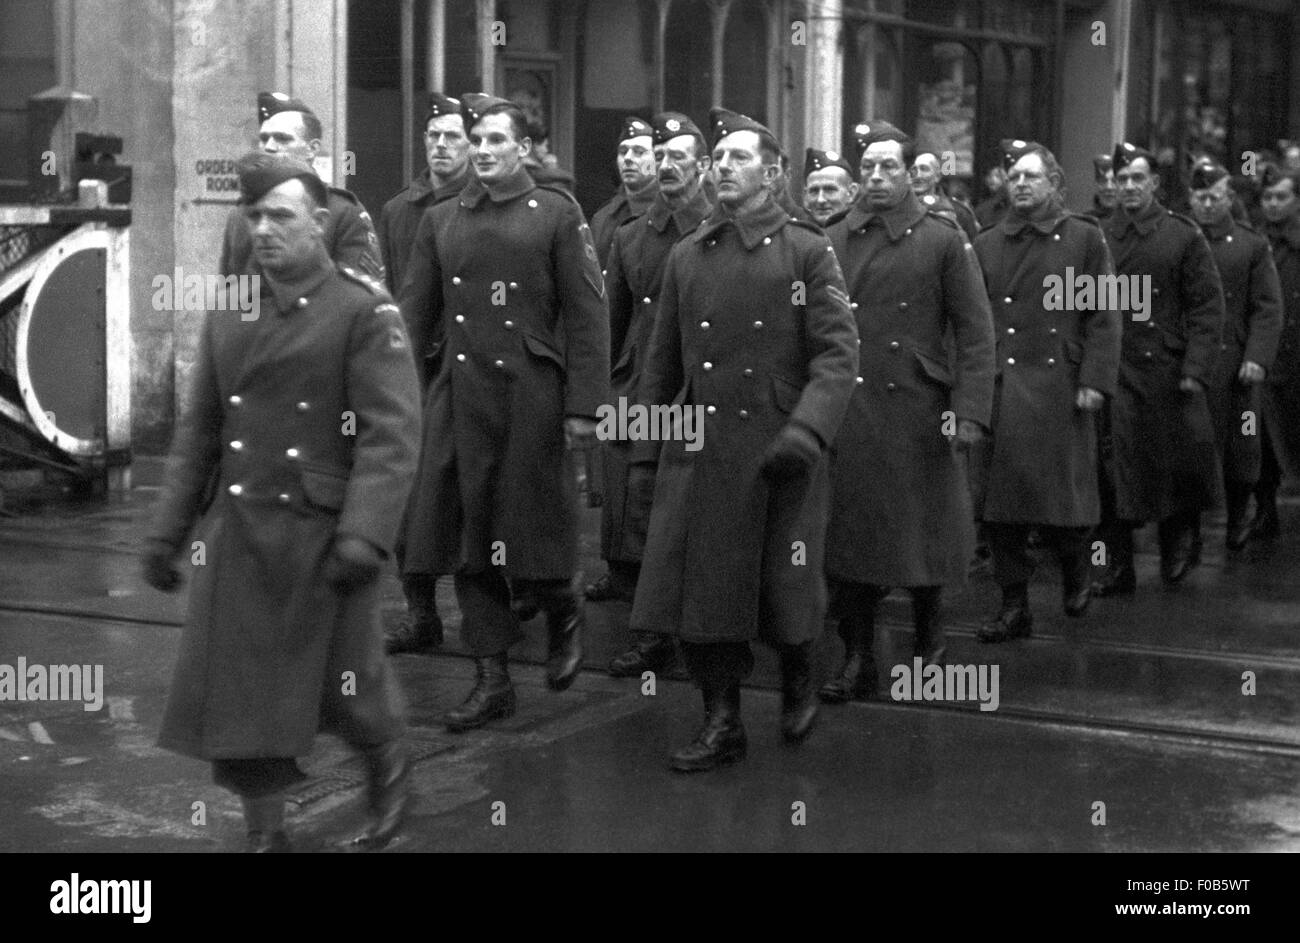 Men of the Home Guard in uniform marching down a street in England Stock Photo